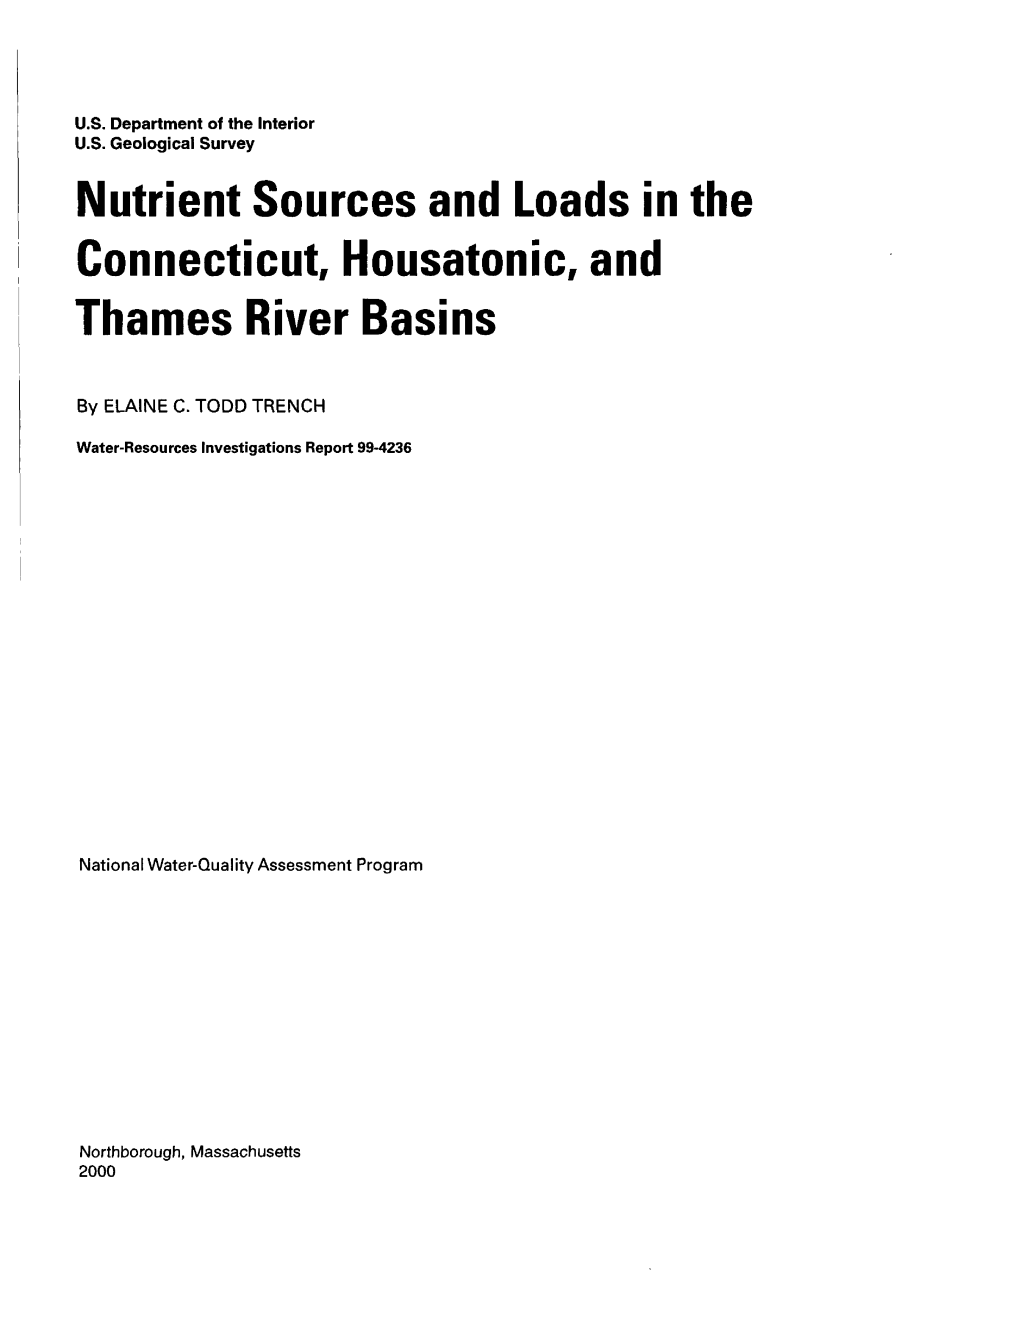 Nutrient Sources and Loads in the Connecticut, Housatonic, and Thames River Basins